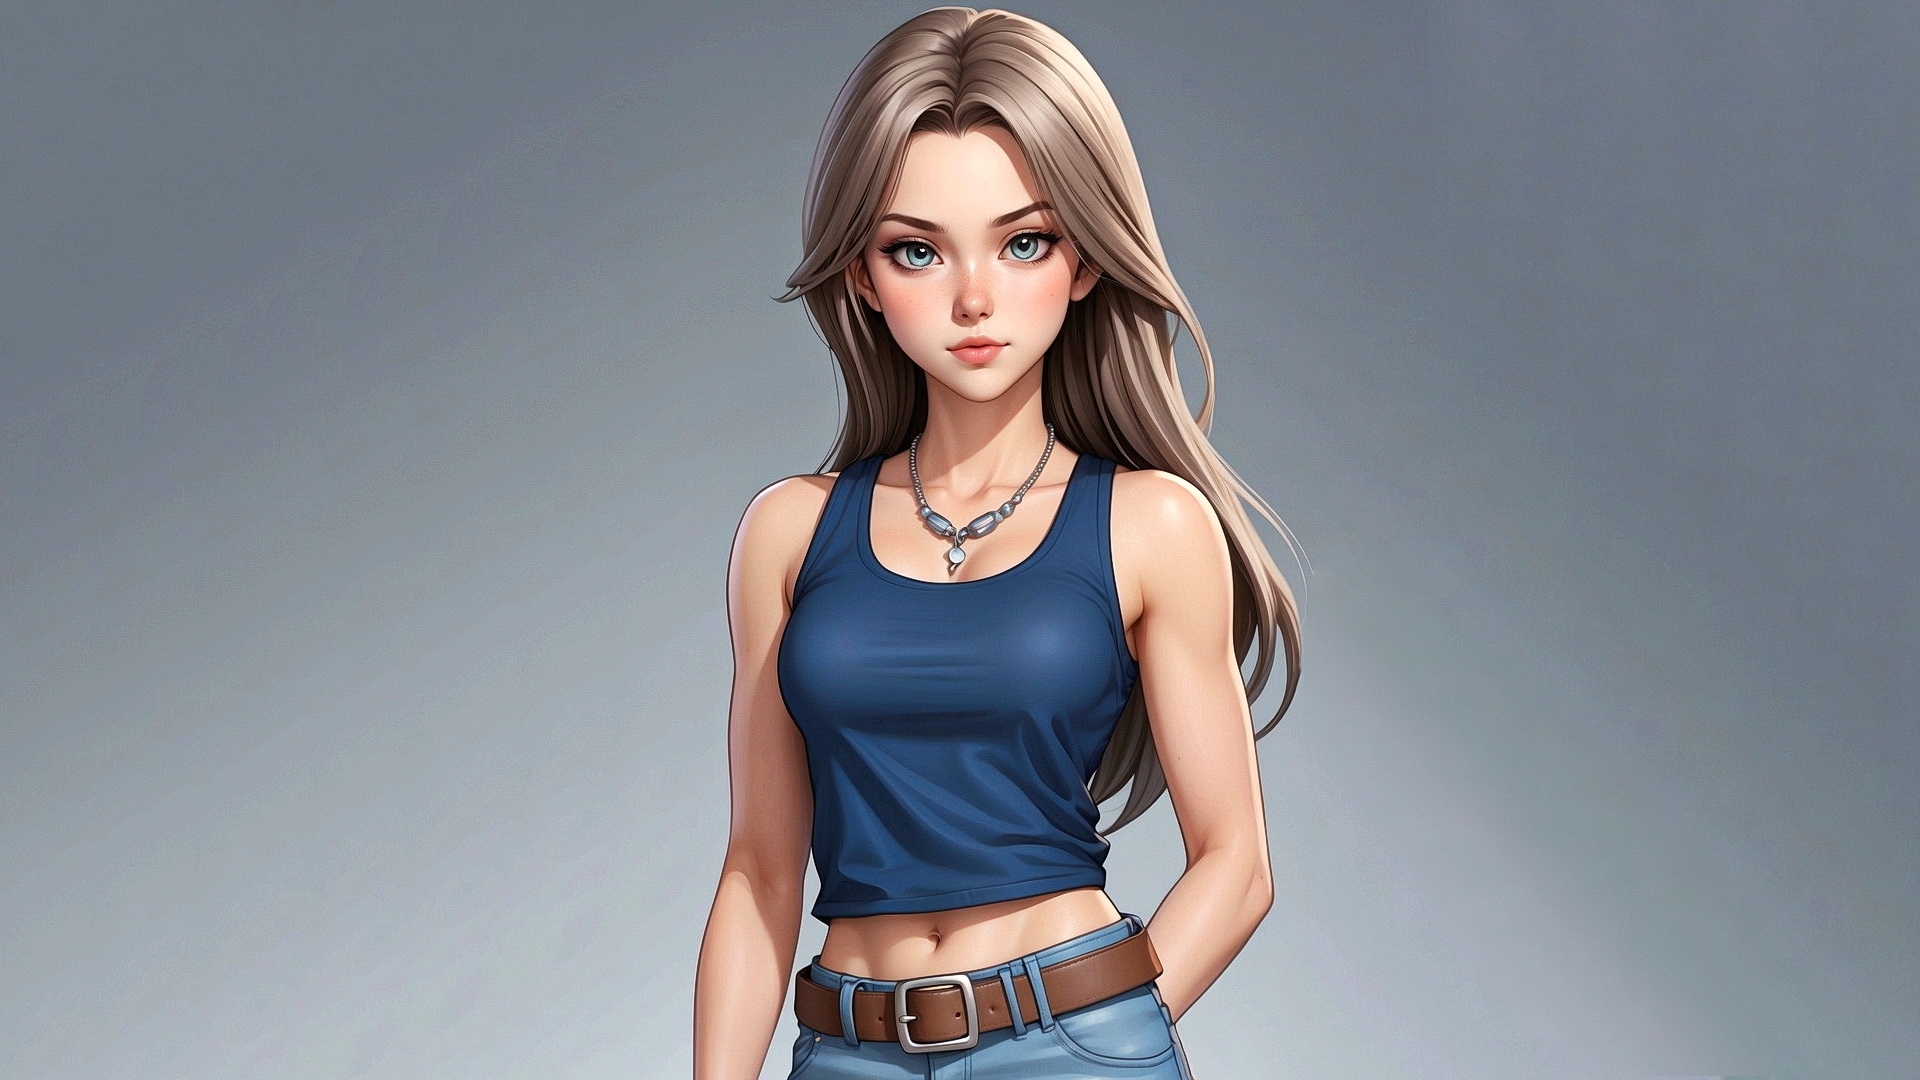 Free photo Blonde-haired girl in a T-shirt and jeans standing on a gray background